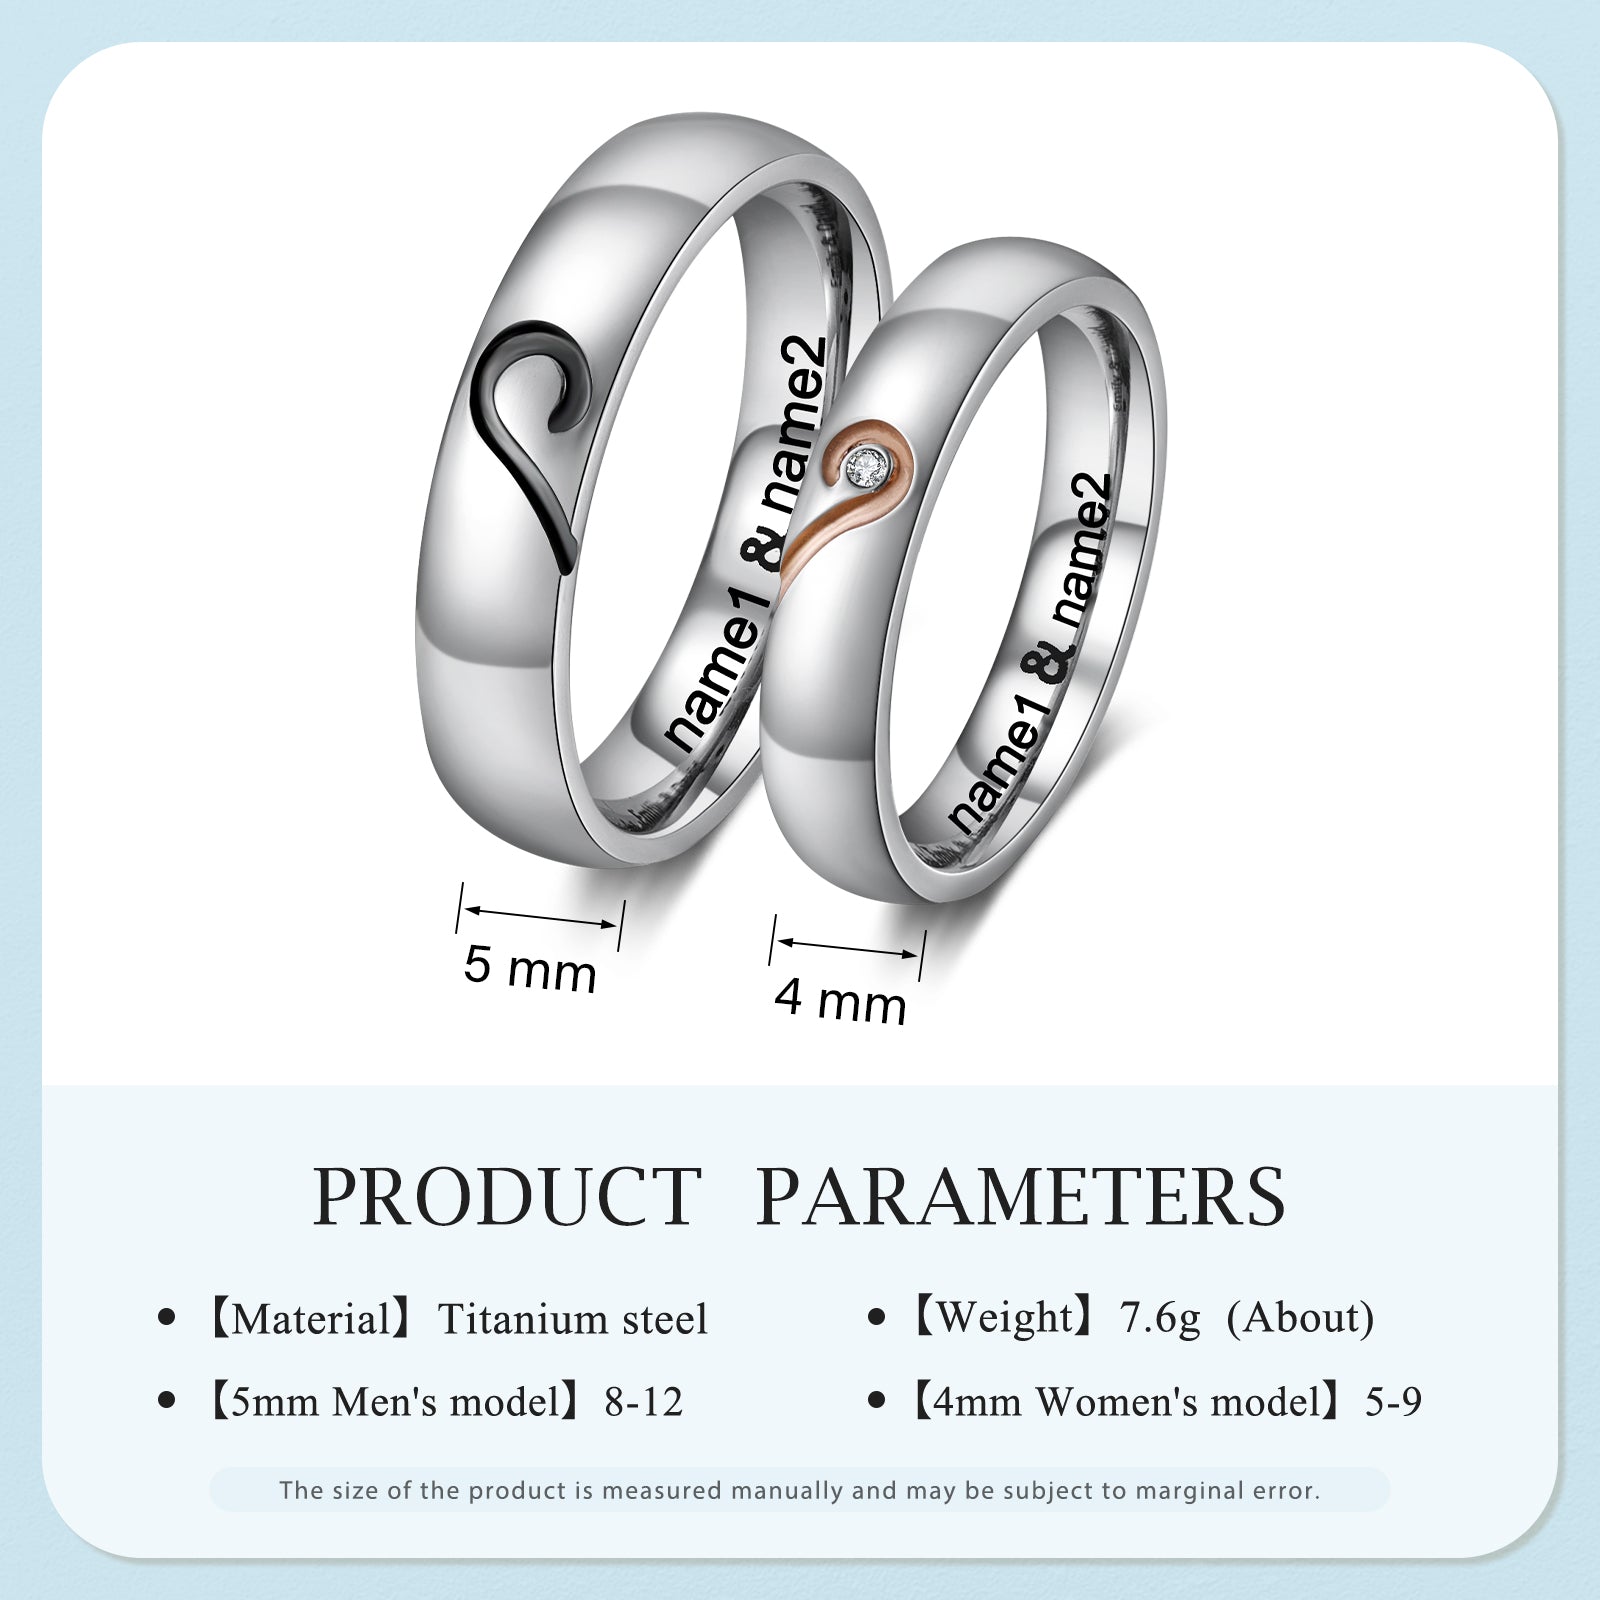 ringheart 2 Rings His and Hers Ring Couple Rings Black Cz Rings Womens  Wedding Ring Sets Titanium Steel Mens Wedding Bands | Amazon.com